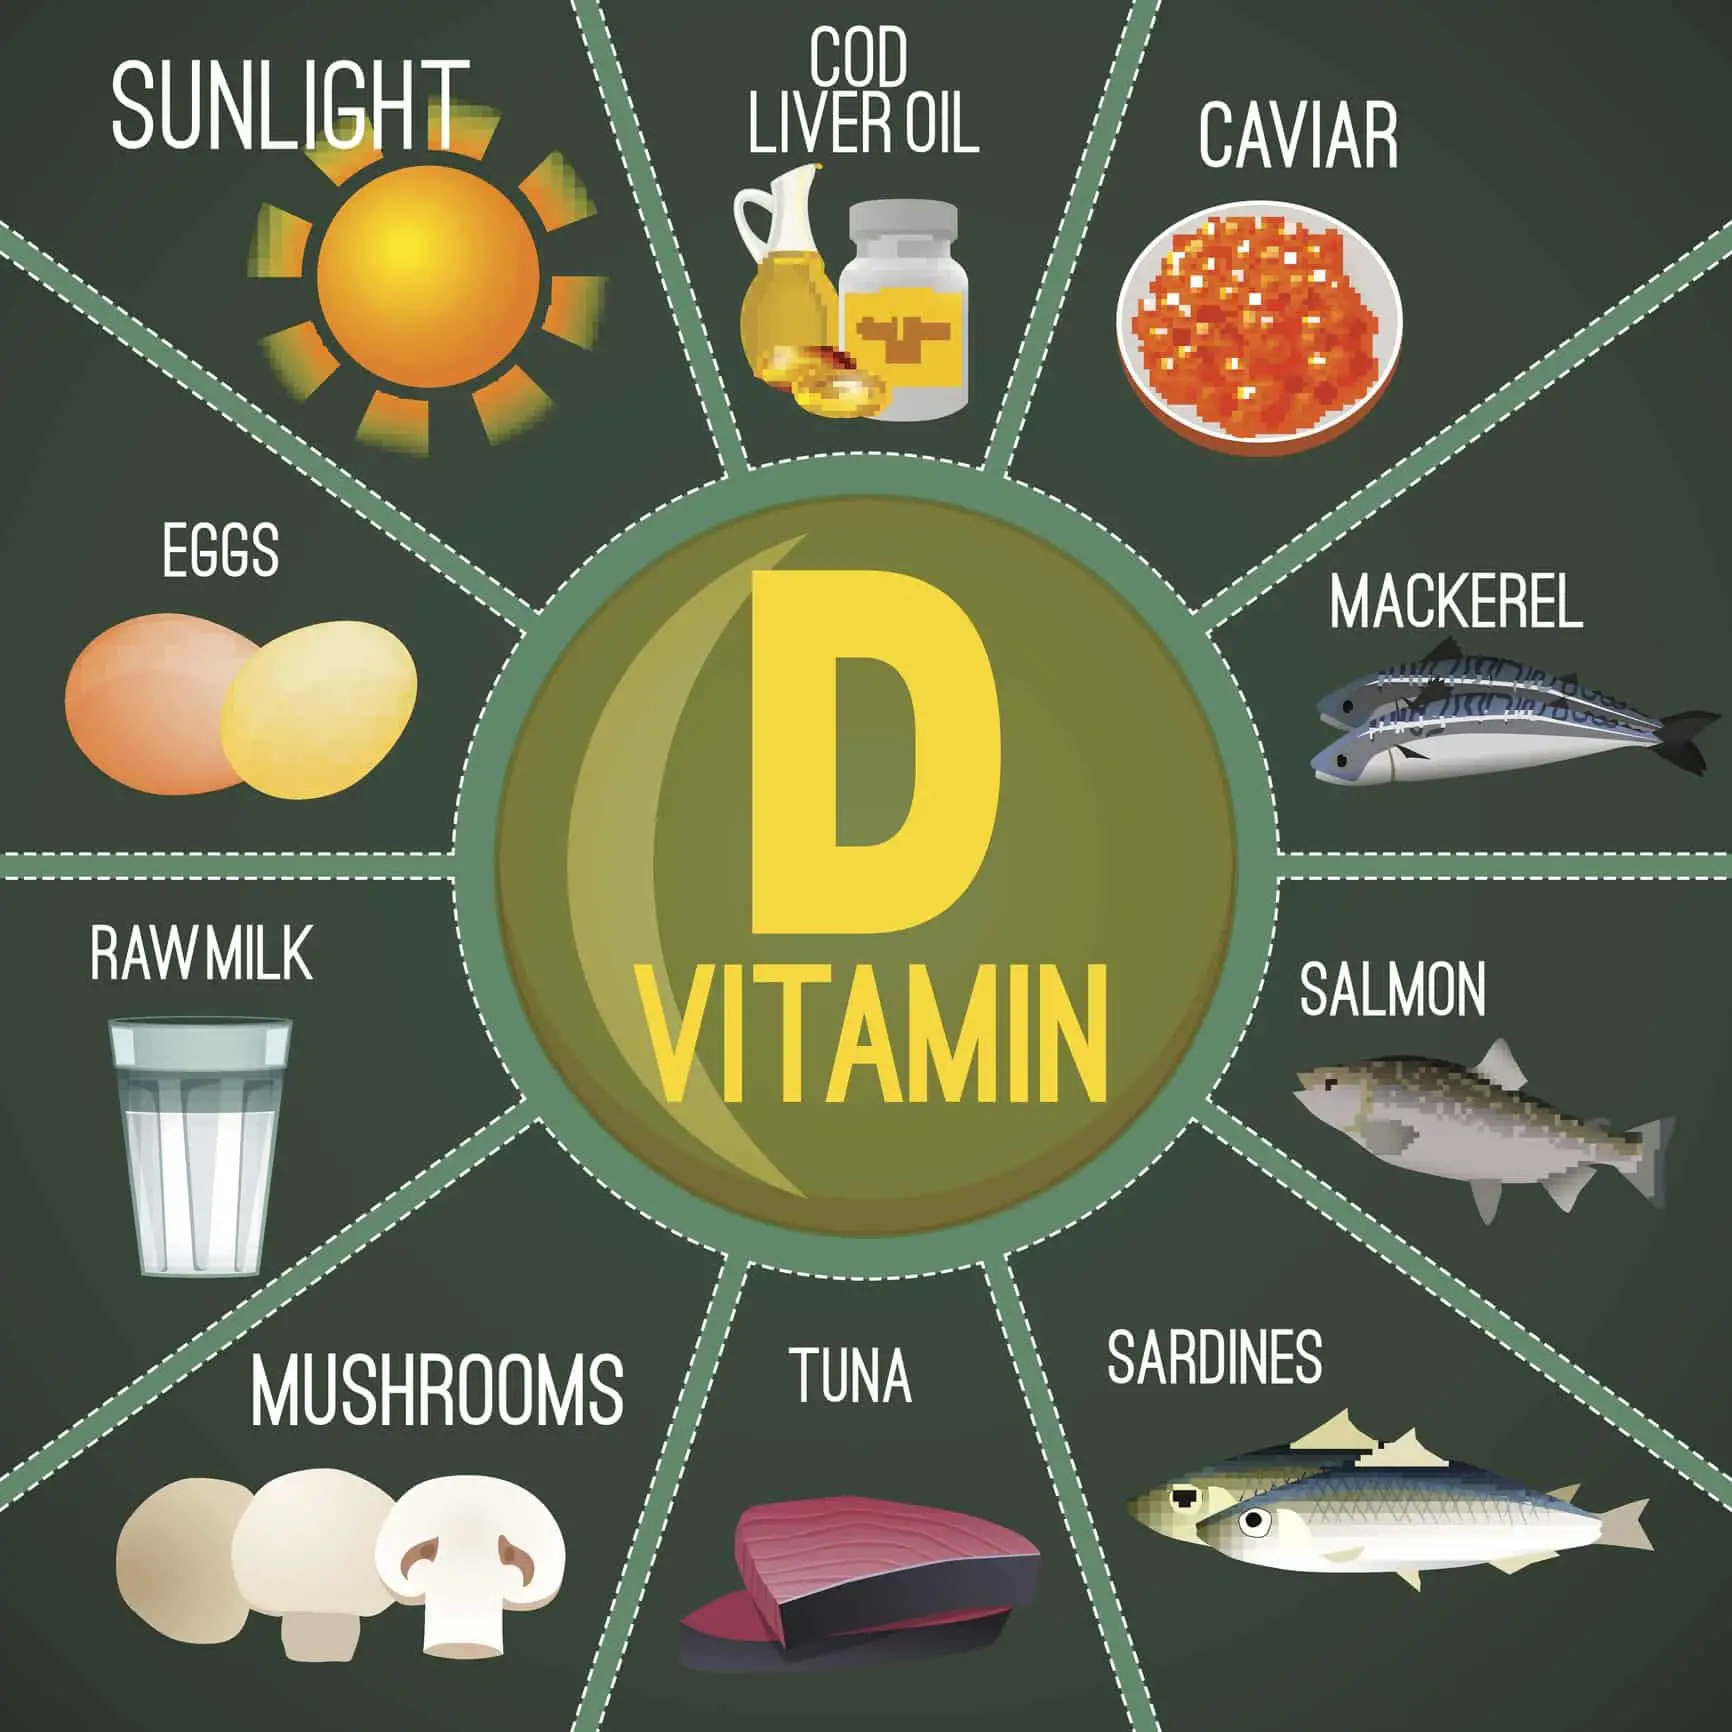 Did You Get Your Vitamin D Today?